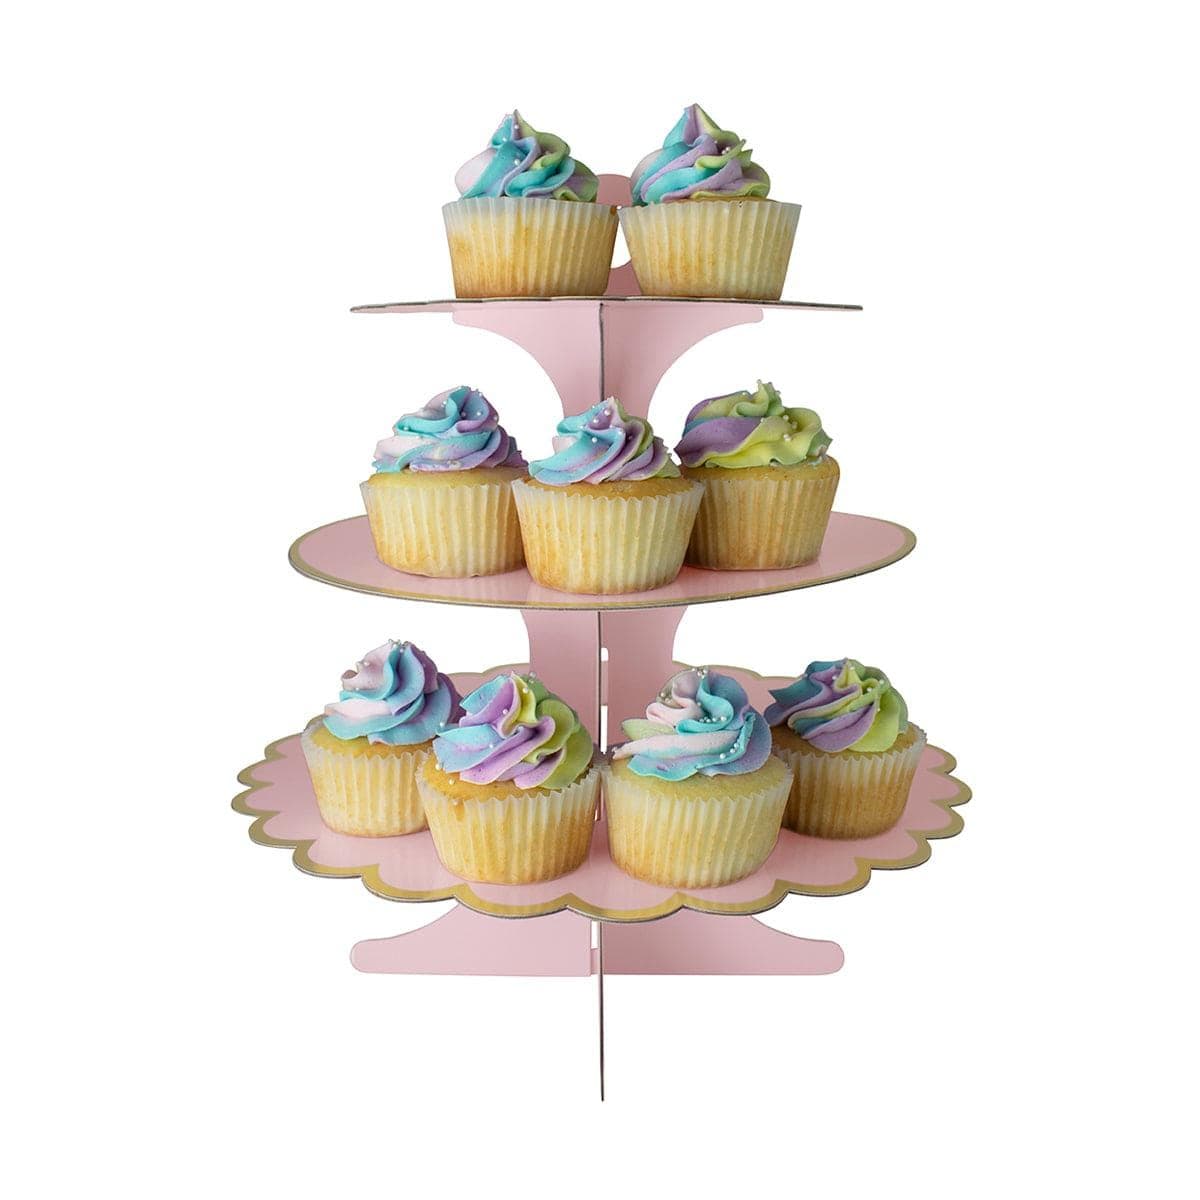 YIWU SANDY PAPER PRODUCTS CO., LTD Everyday Entertaining Cupcake Stand 3 Tiers, Light Pink